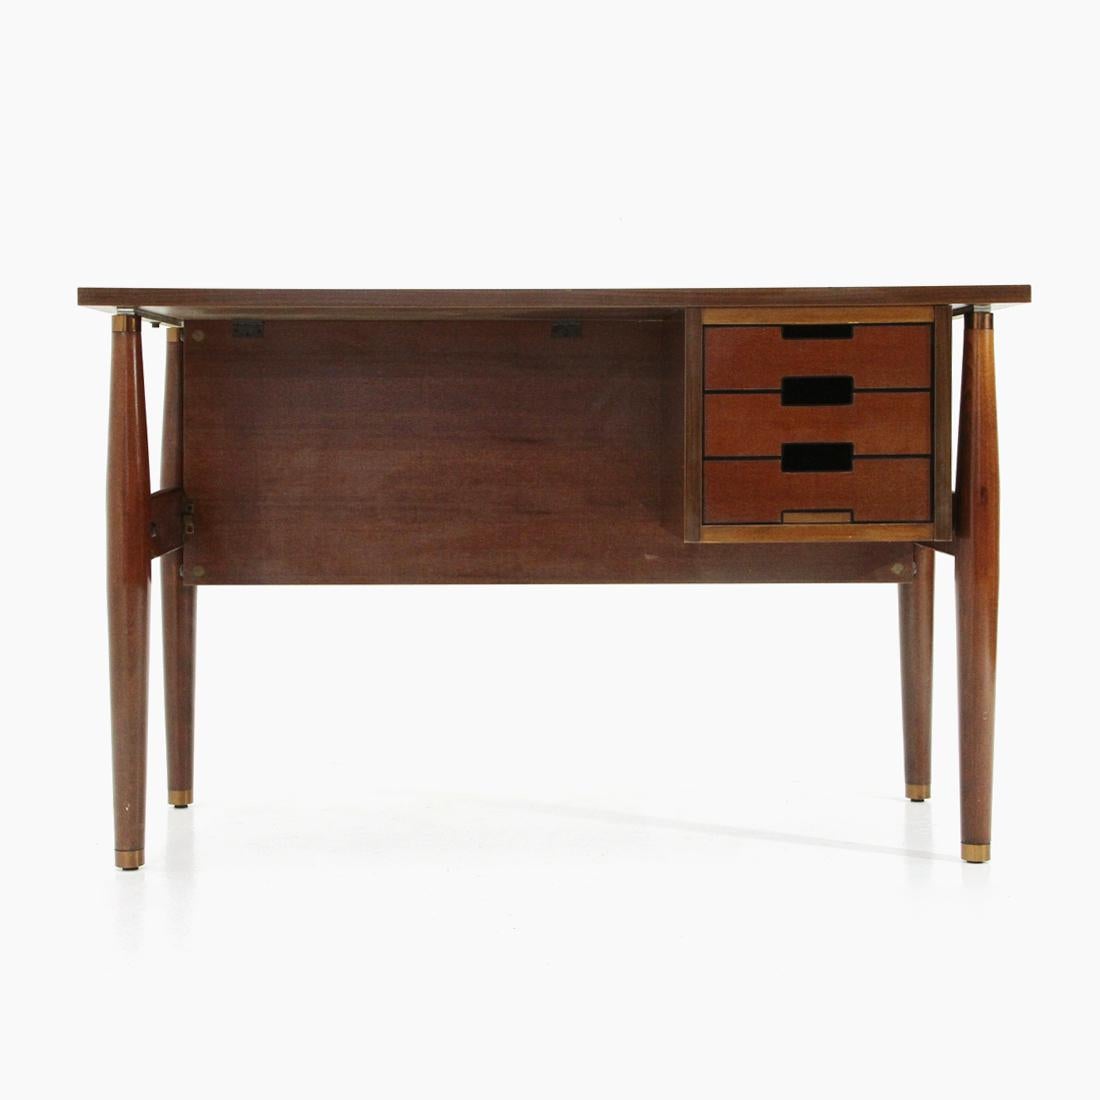 Desk produced in the 1960s by Schirolli.
Structure in wood, tips in brass.
Plastic drawers with wood veneer front.
Formica veneered wood top.
Good general condition, some signs due to normal use over time, signs of the screws on the front